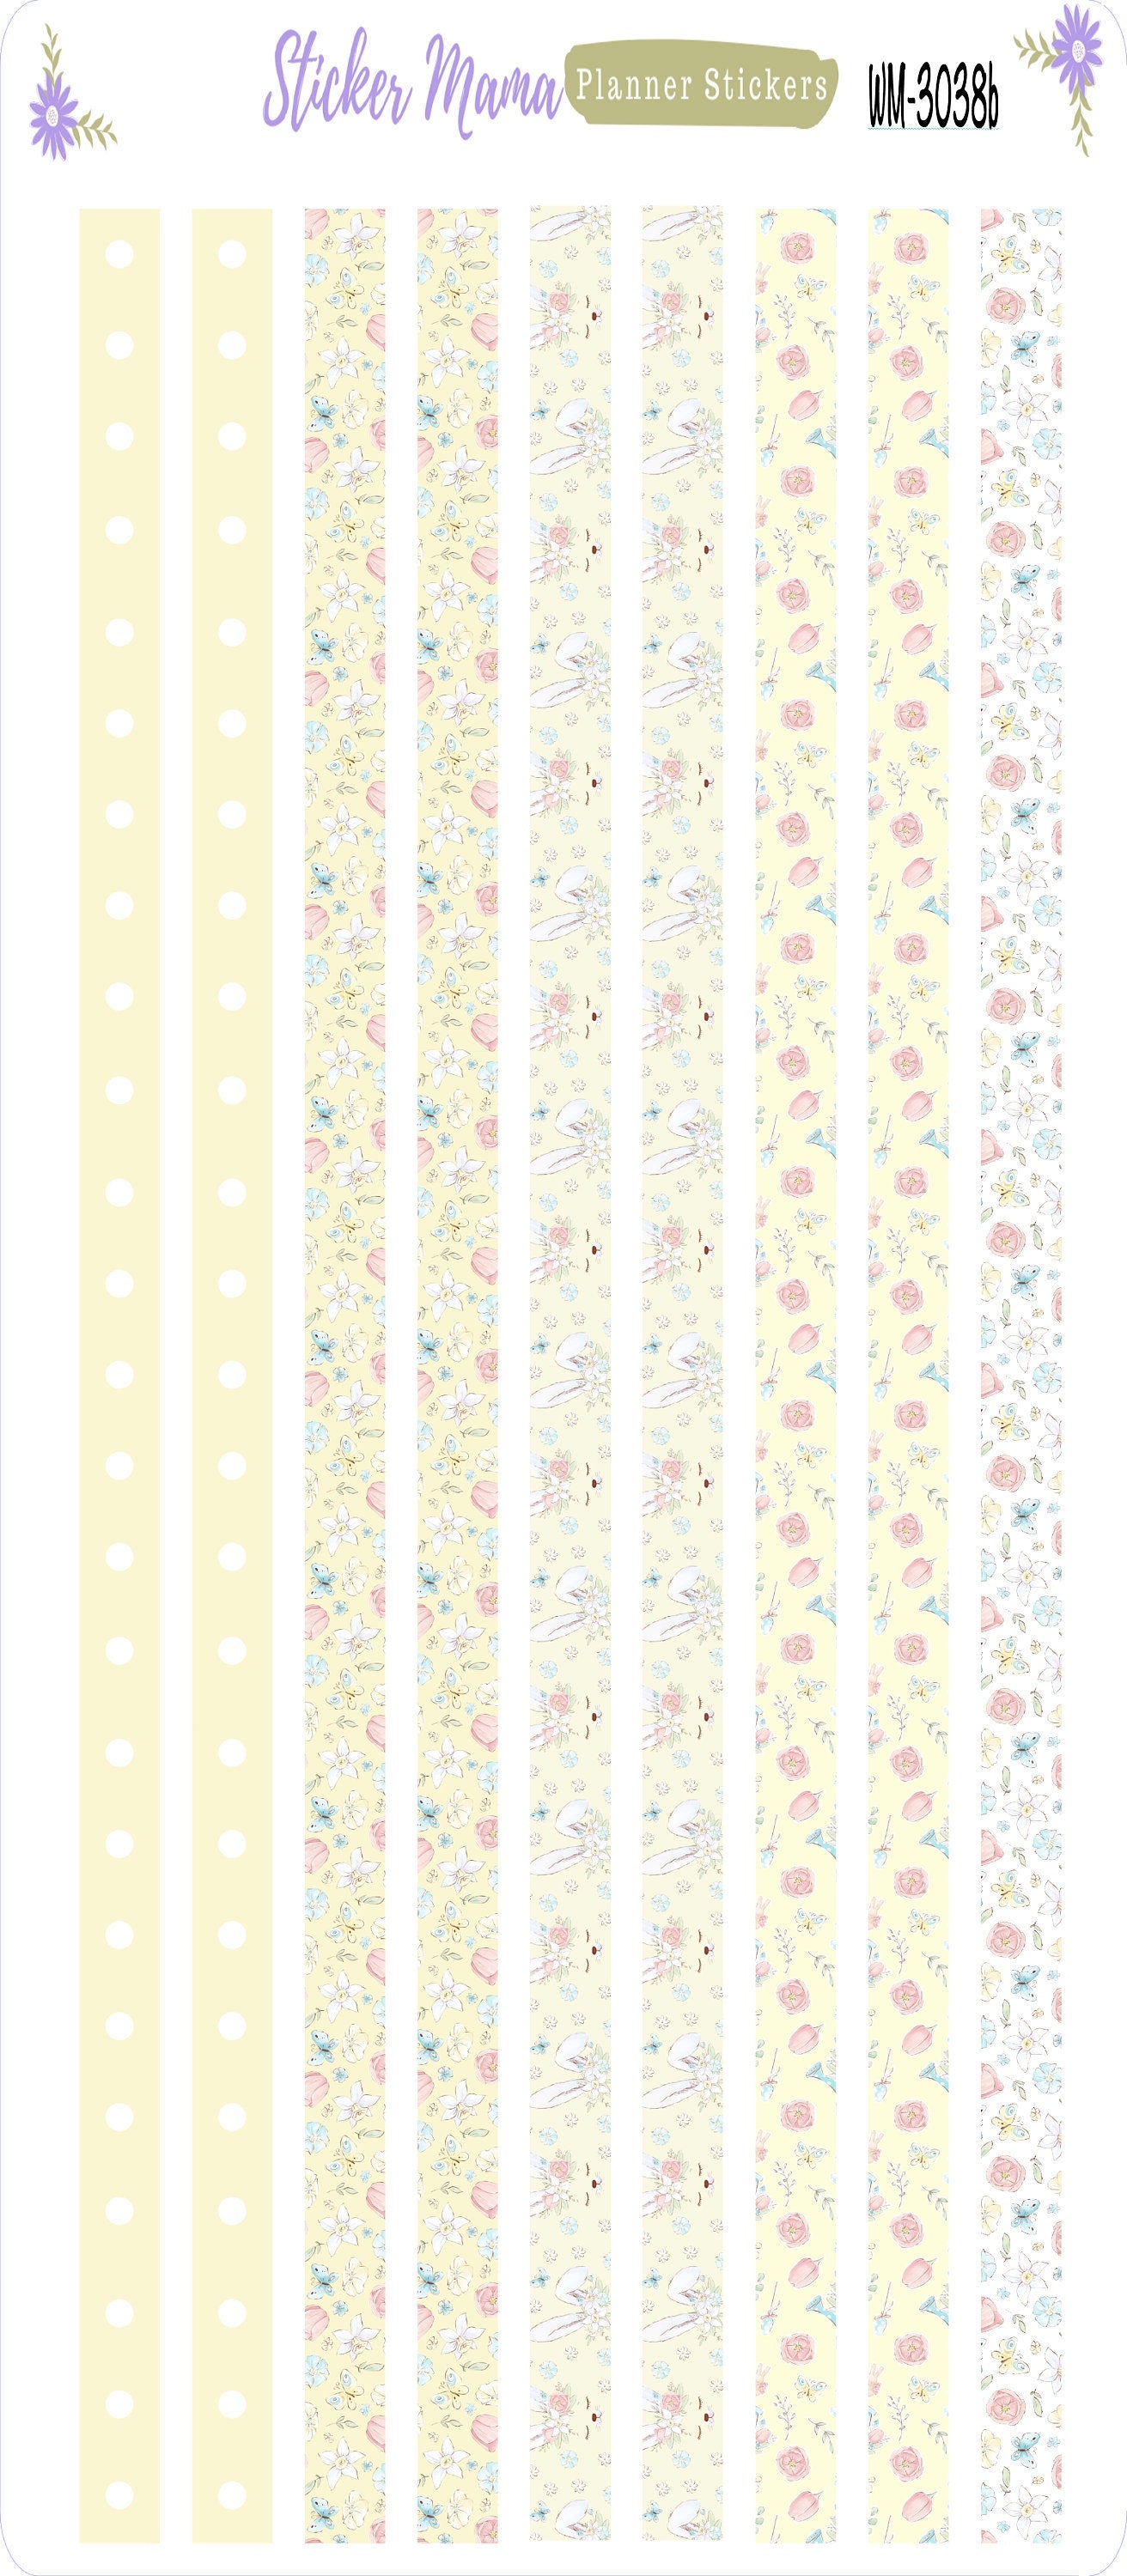 W-3038 "Easter Spring Time" || Washi Stickers || Planner Stickers || Washi for Planners || Easter Sticker Kit